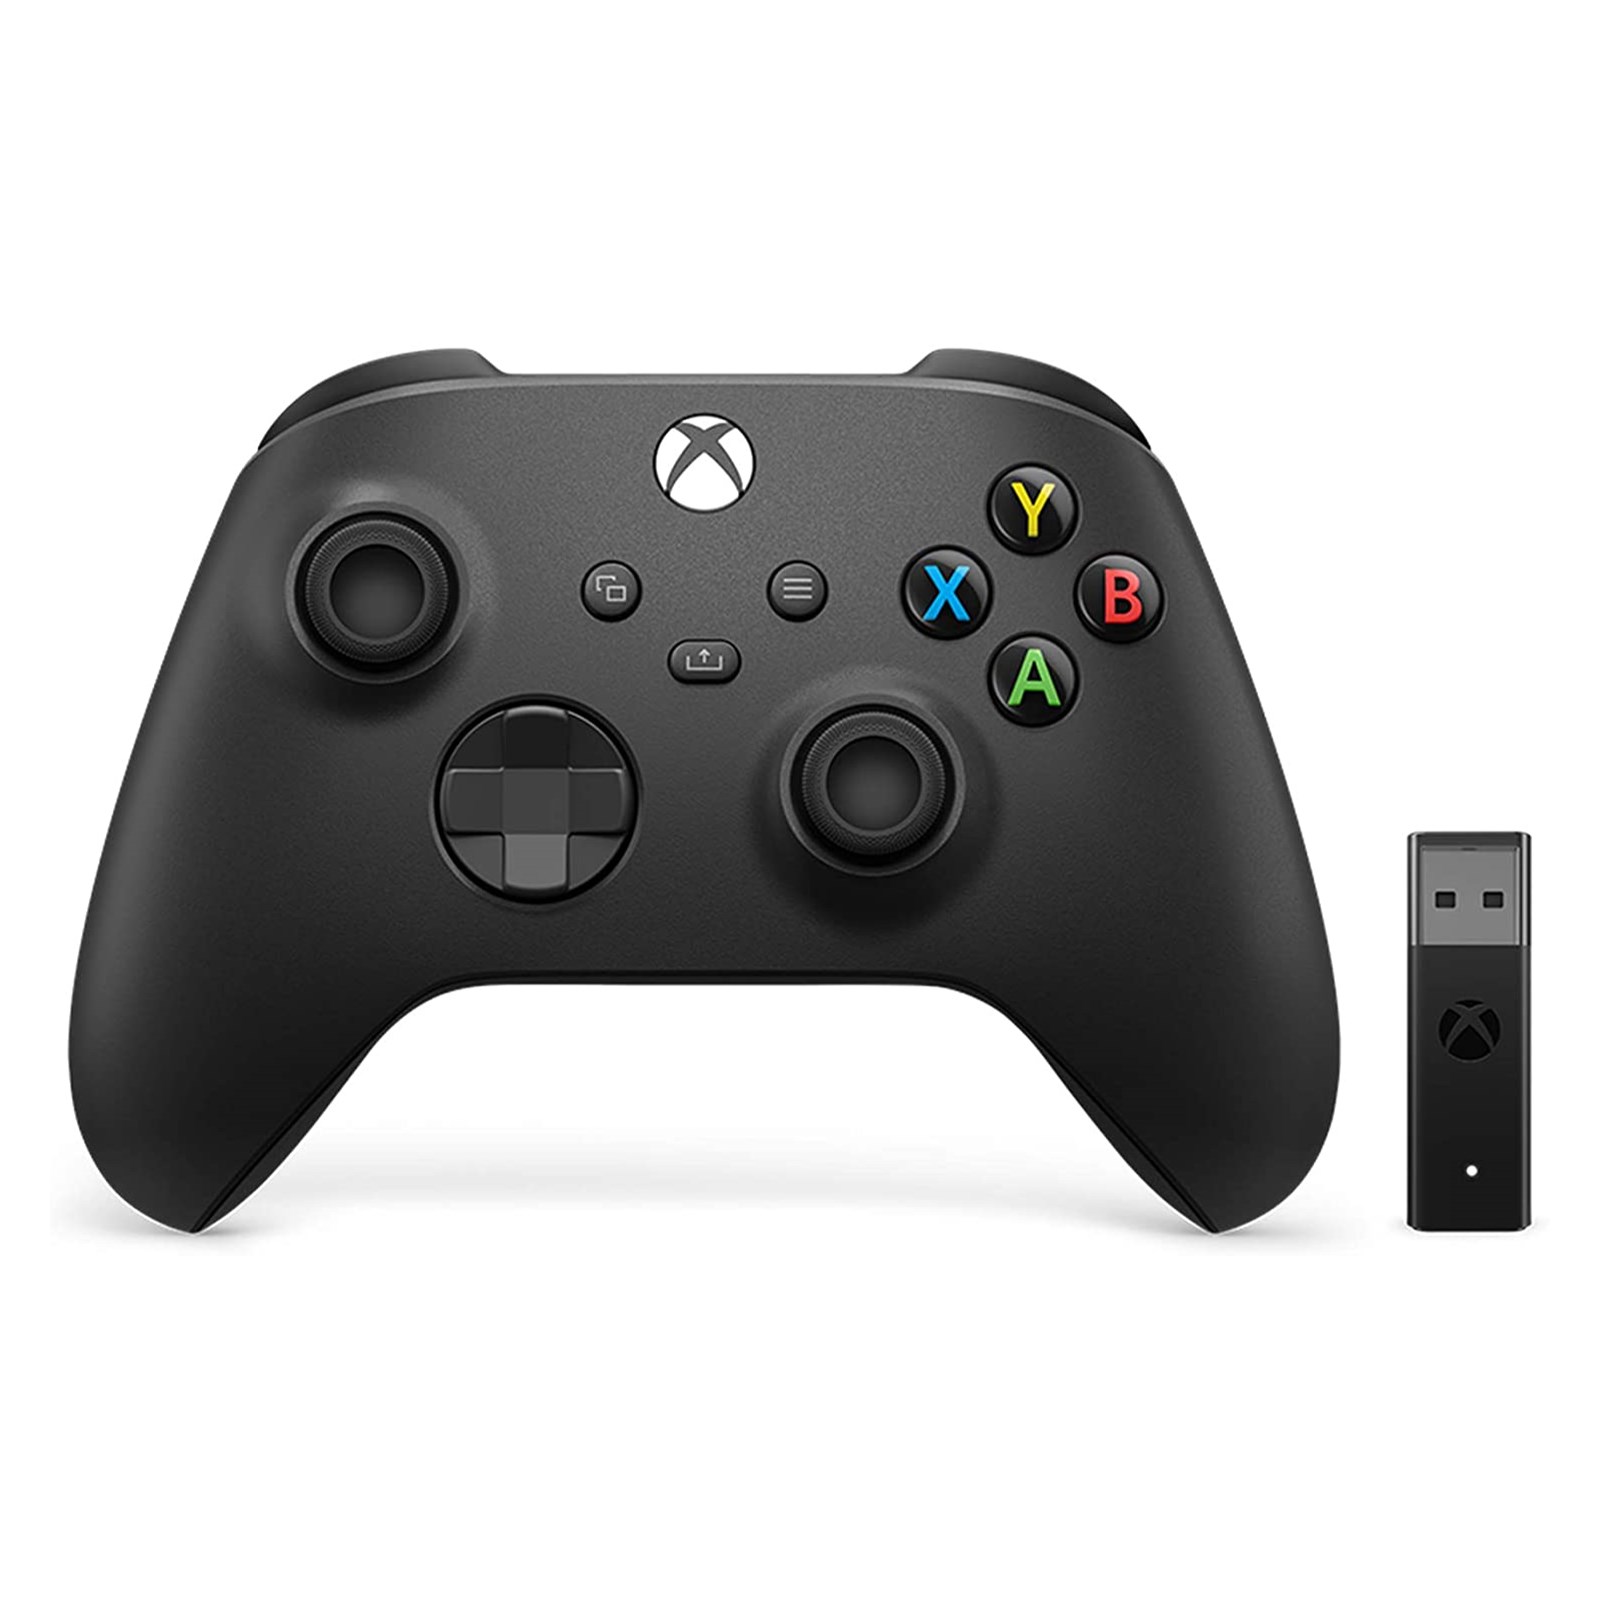 Microsoft - Microsoft Wireless Controller and USB Wireless Adapter For Windows PC's